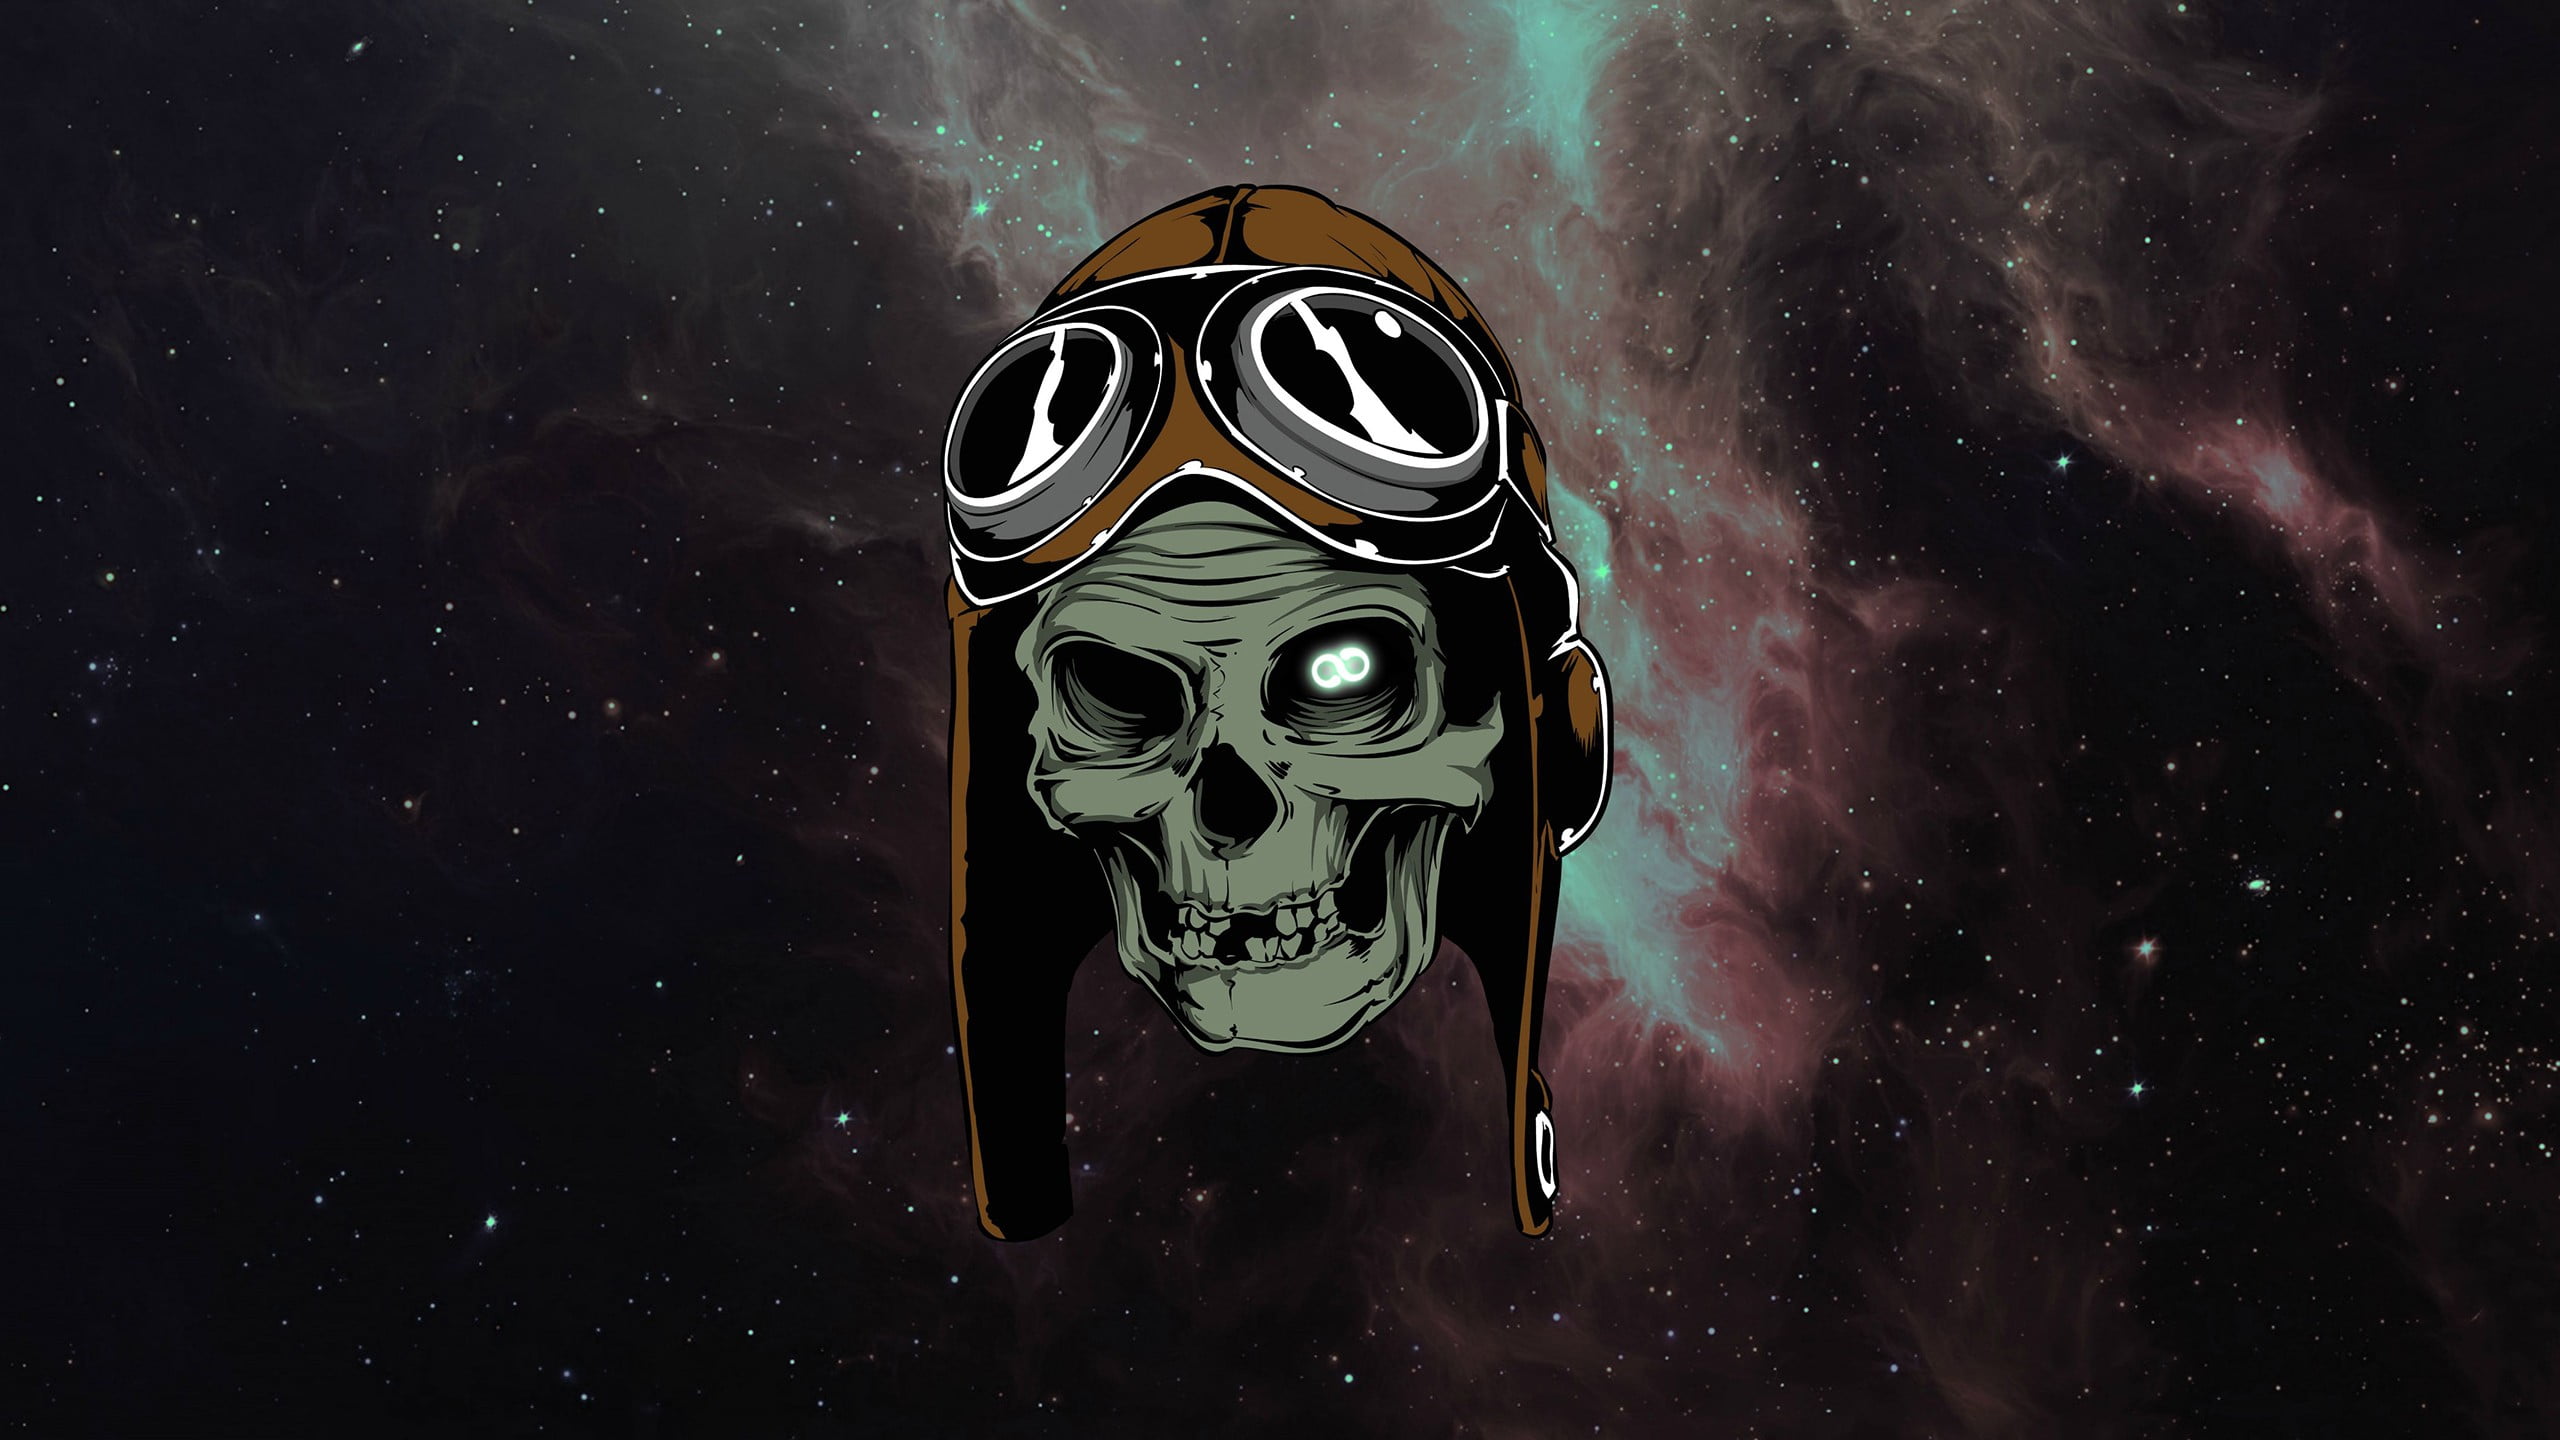 artwork, skull, space, mask, astronomy, disguise, star - space